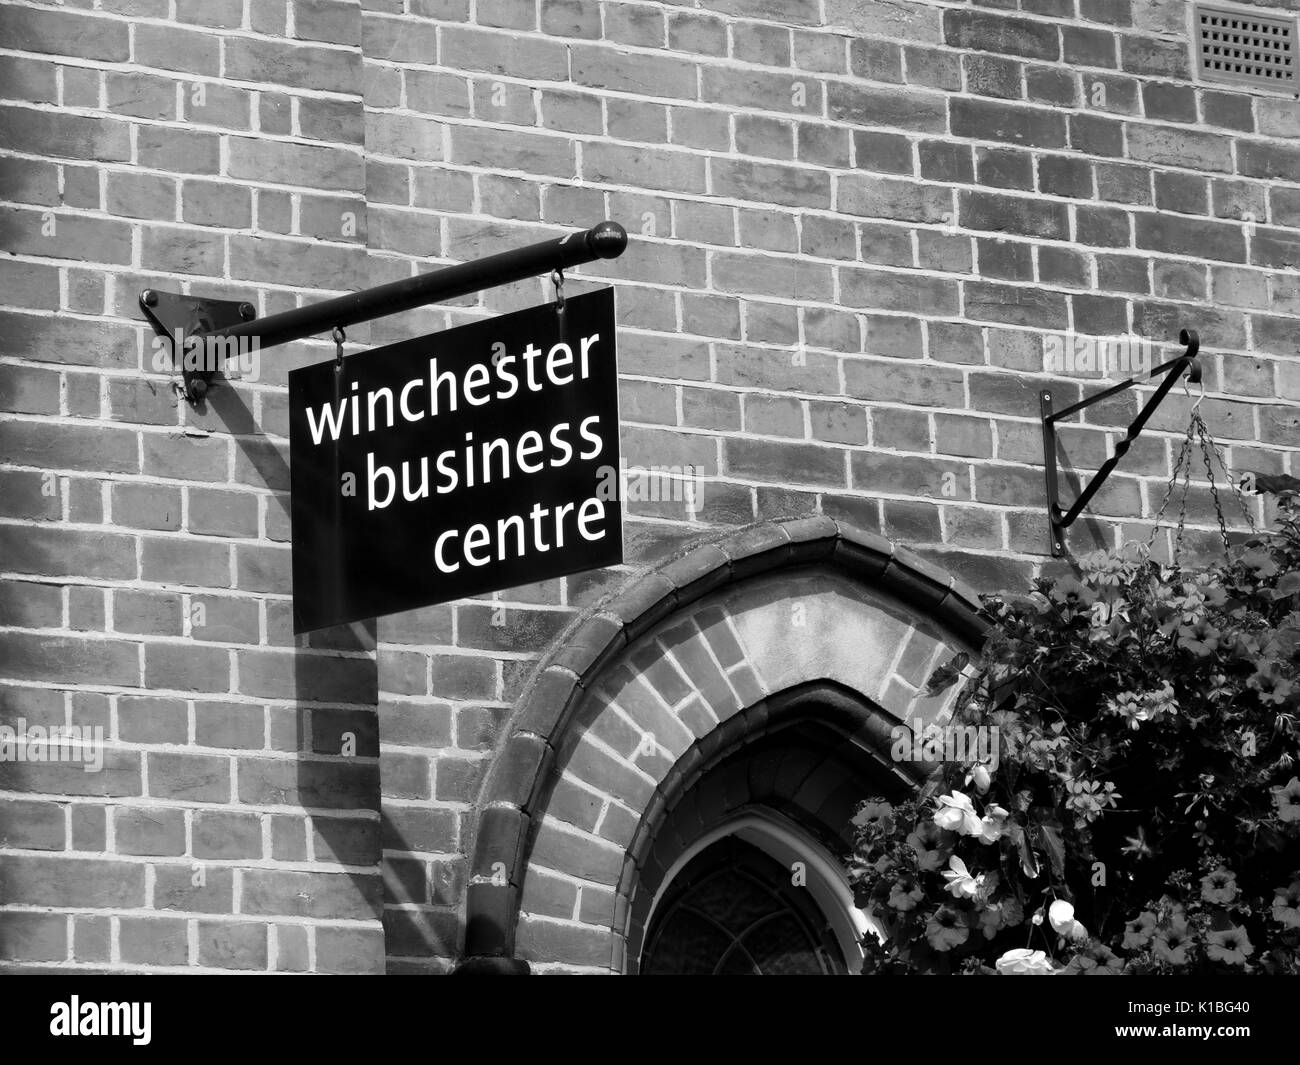 Business centre sign over premises, helping to promote and enhance businesses in the city Stock Photo